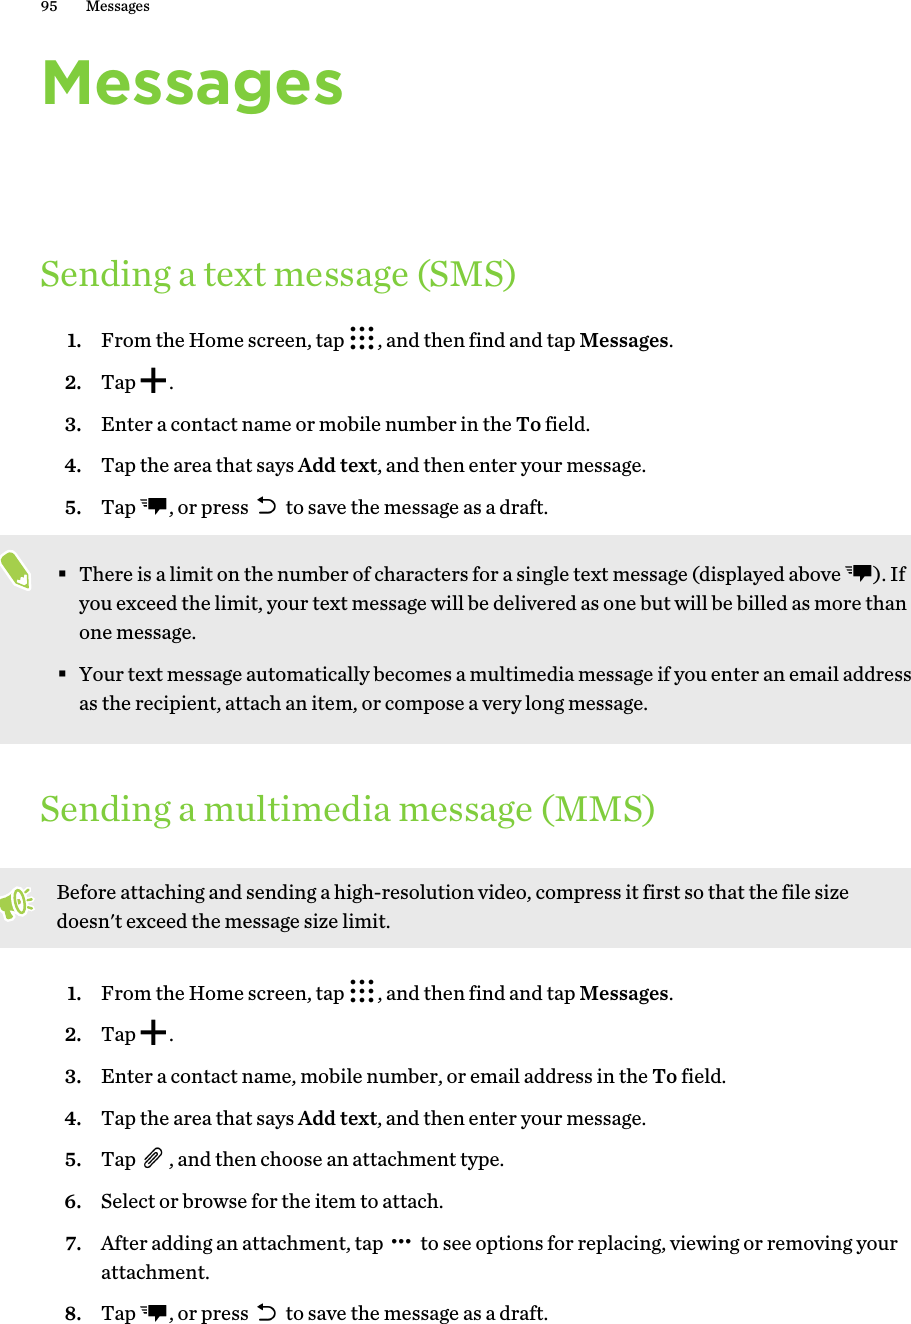 MessagesSending a text message (SMS)1. From the Home screen, tap  , and then find and tap Messages.2. Tap  .3. Enter a contact name or mobile number in the To field.4. Tap the area that says Add text, and then enter your message.5. Tap  , or press   to save the message as a draft. §There is a limit on the number of characters for a single text message (displayed above  ). Ifyou exceed the limit, your text message will be delivered as one but will be billed as more thanone message.§Your text message automatically becomes a multimedia message if you enter an email addressas the recipient, attach an item, or compose a very long message.Sending a multimedia message (MMS)Before attaching and sending a high-resolution video, compress it first so that the file sizedoesn&apos;t exceed the message size limit.1. From the Home screen, tap  , and then find and tap Messages.2. Tap  .3. Enter a contact name, mobile number, or email address in the To field.4. Tap the area that says Add text, and then enter your message.5. Tap  , and then choose an attachment type.6. Select or browse for the item to attach.7. After adding an attachment, tap   to see options for replacing, viewing or removing yourattachment.8. Tap  , or press   to save the message as a draft.95 Messages